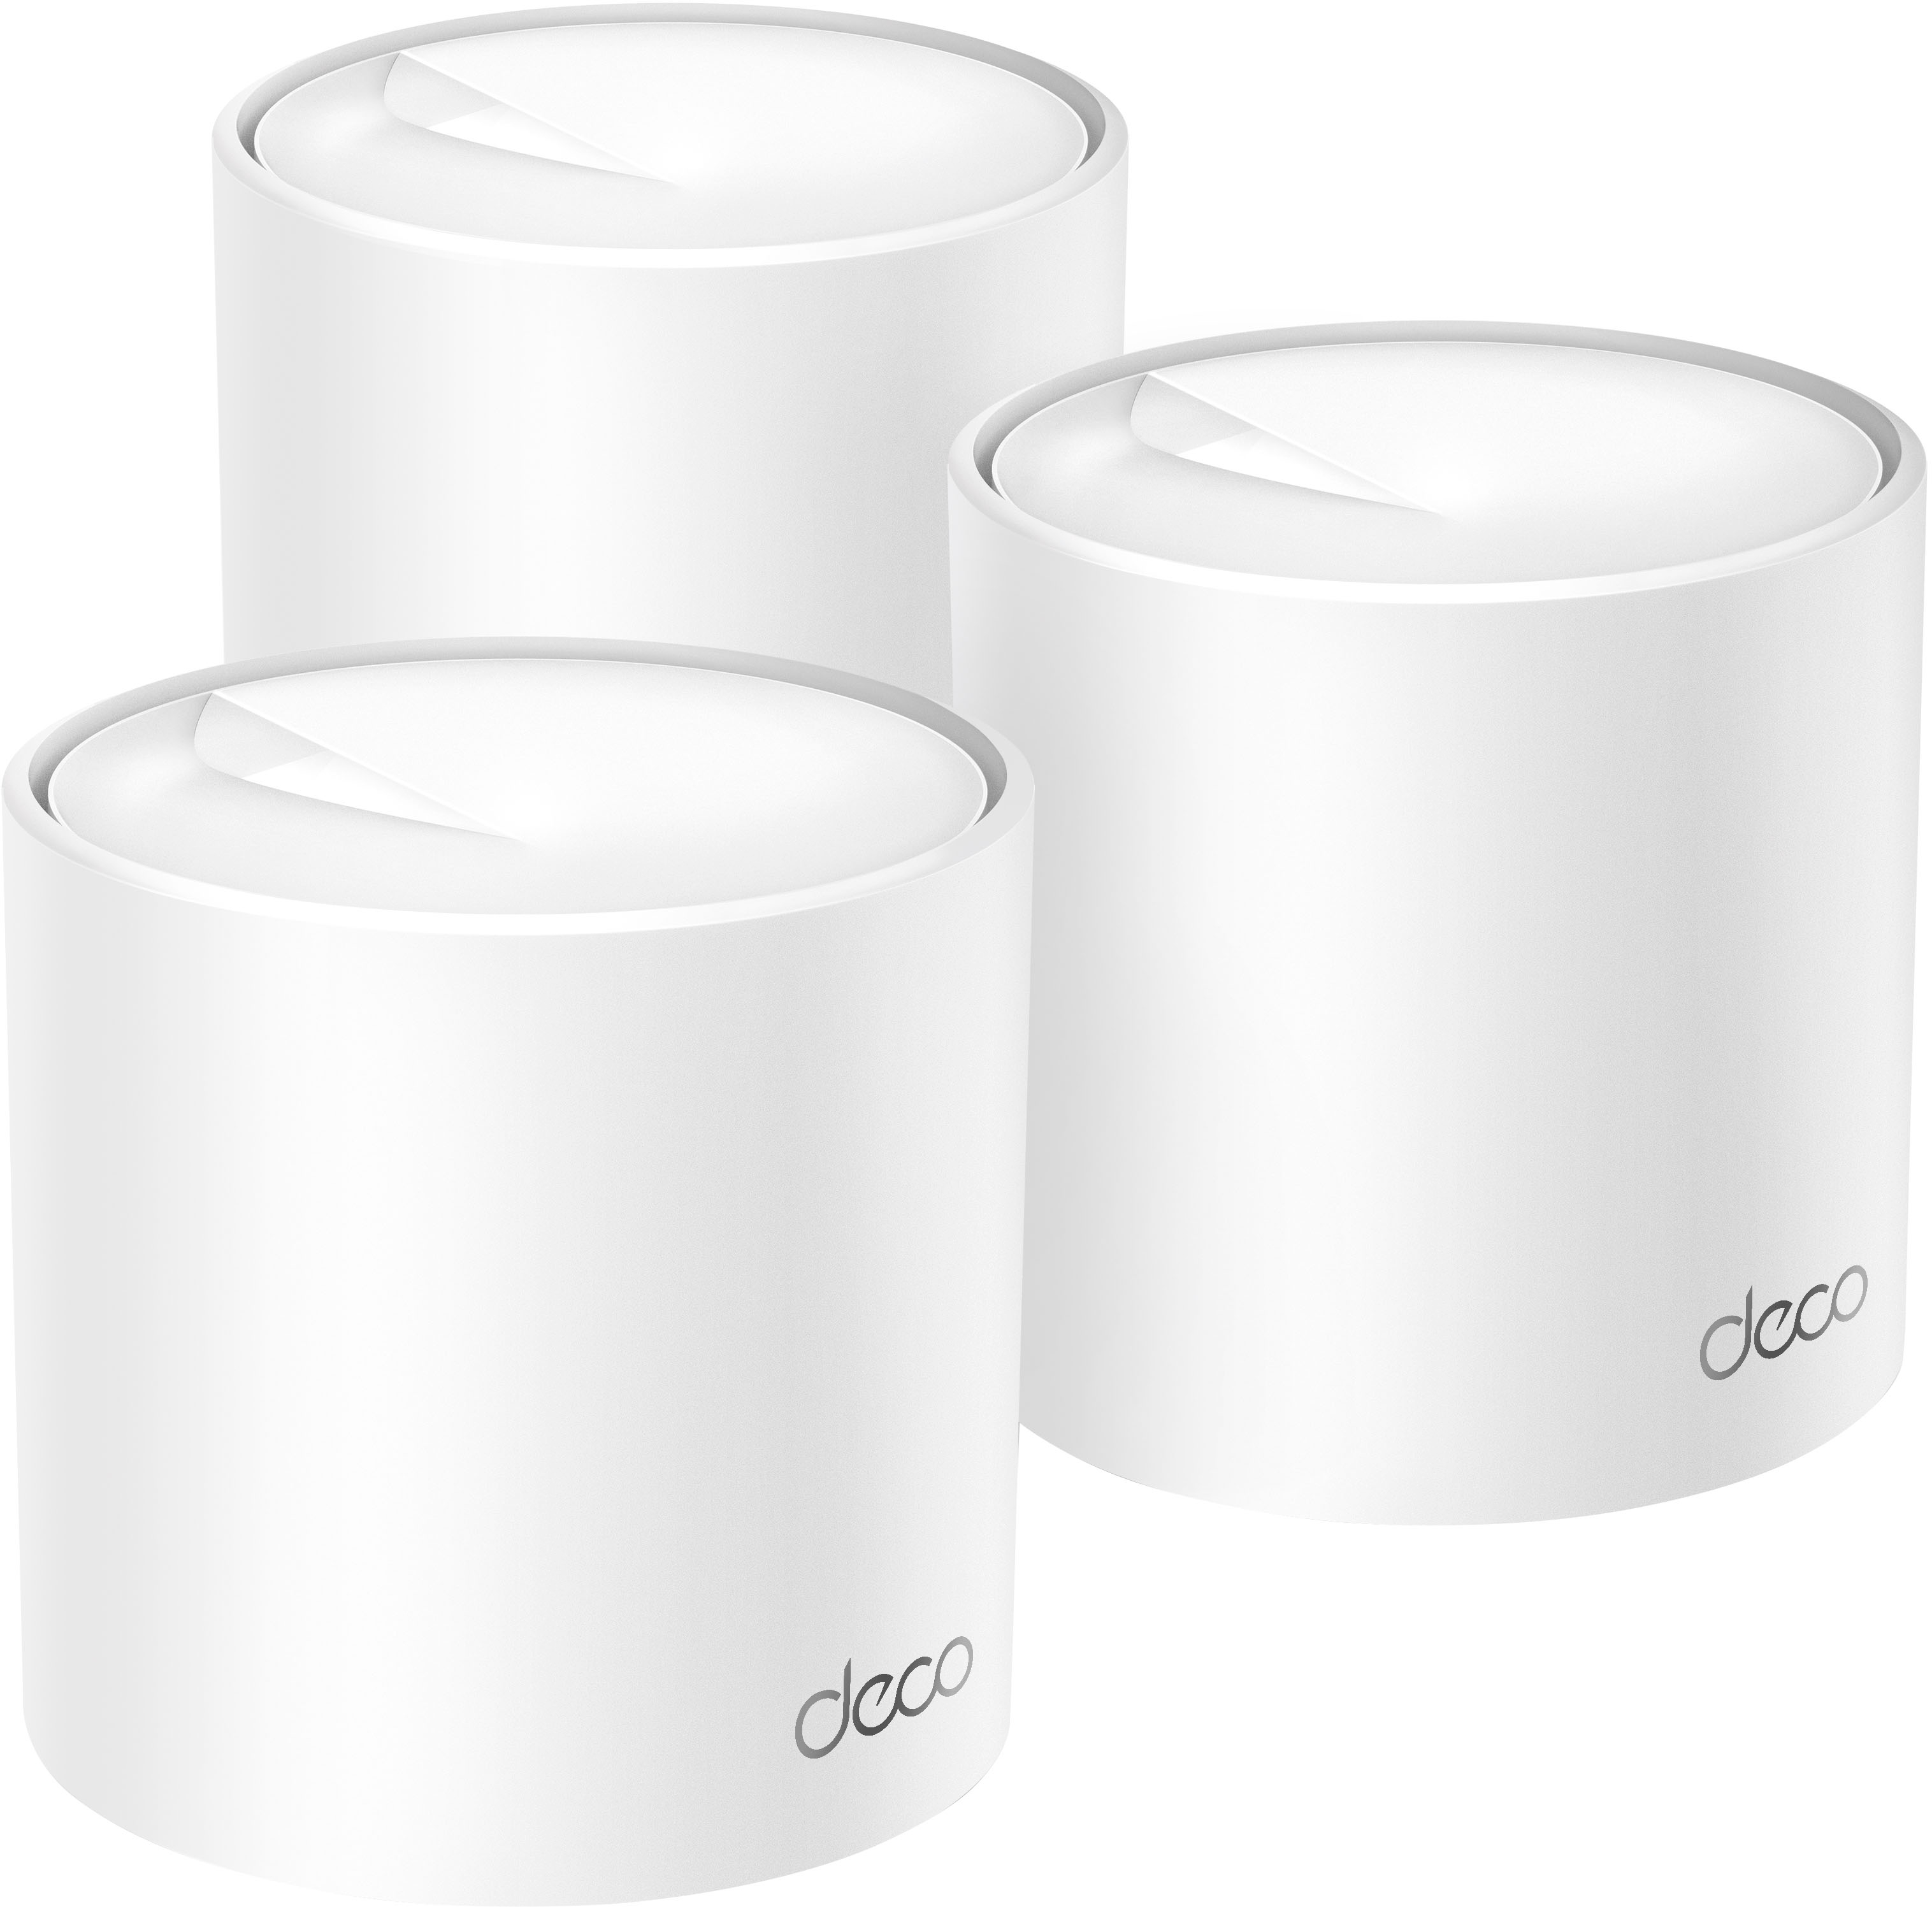 Google Nest Wifi and TP-Link Deco X60: Which is the best mesh